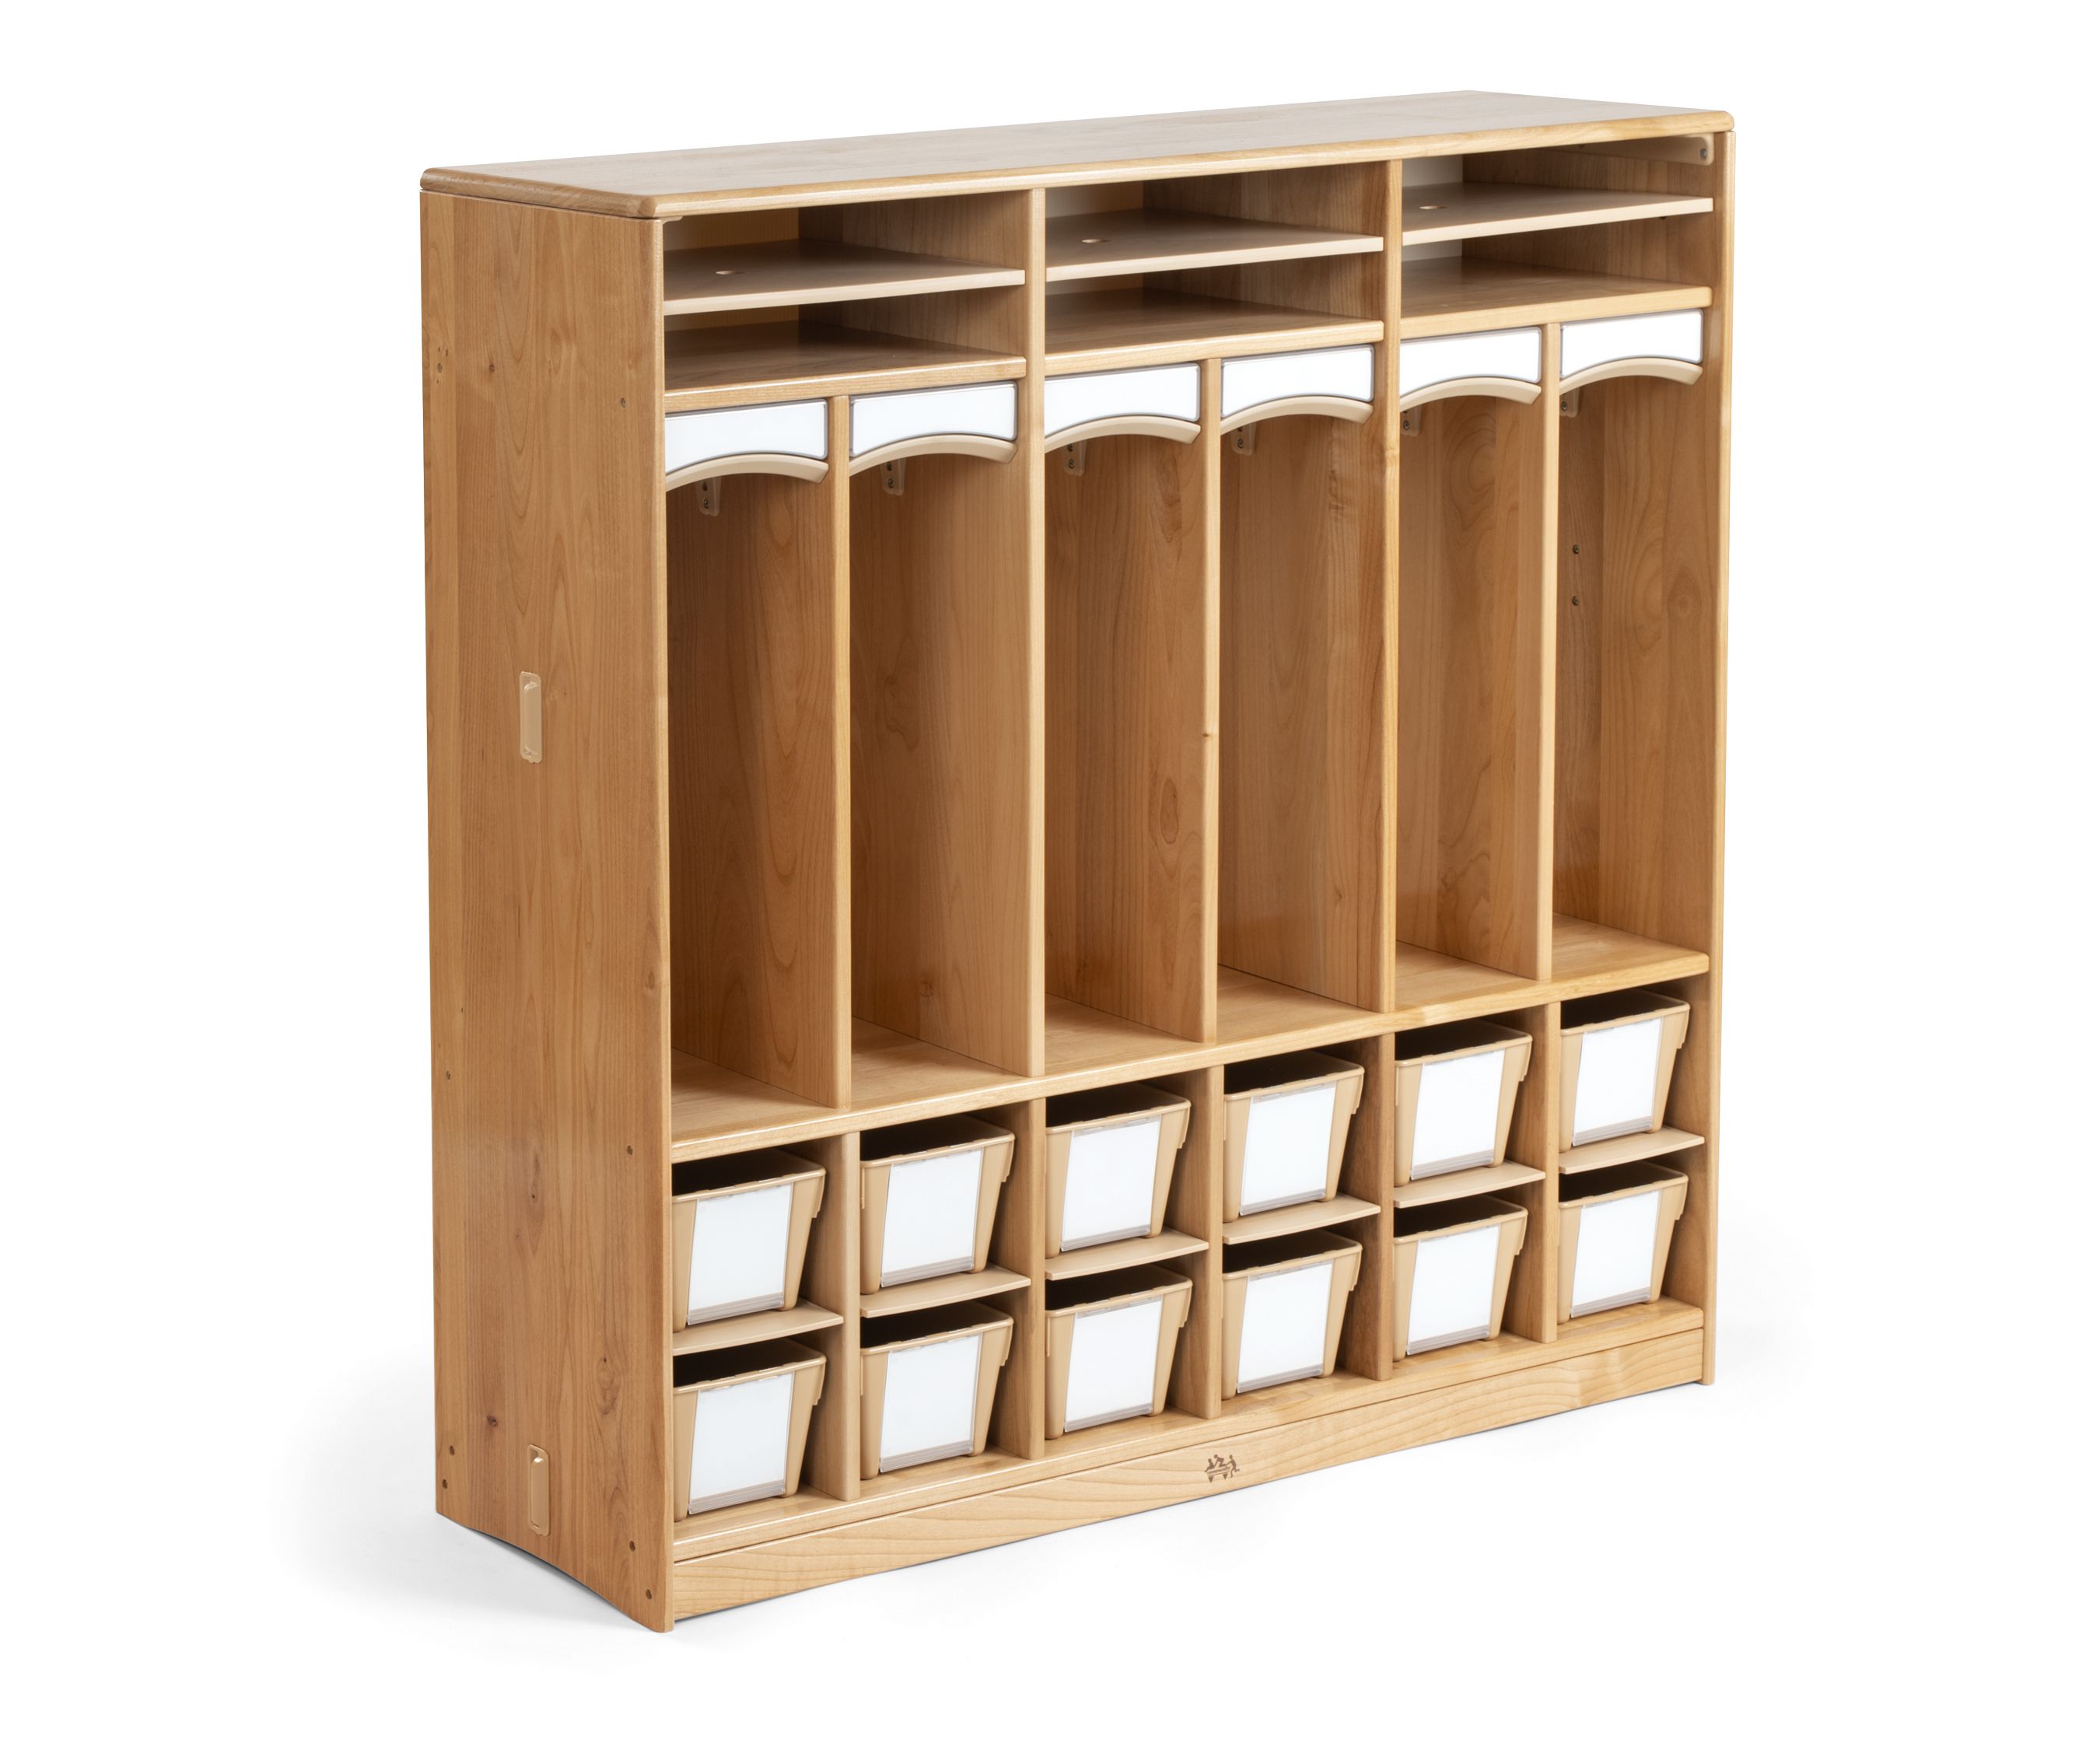 Daycare Furniture: Storage, Play Toys, Lockers, Cribs, & More